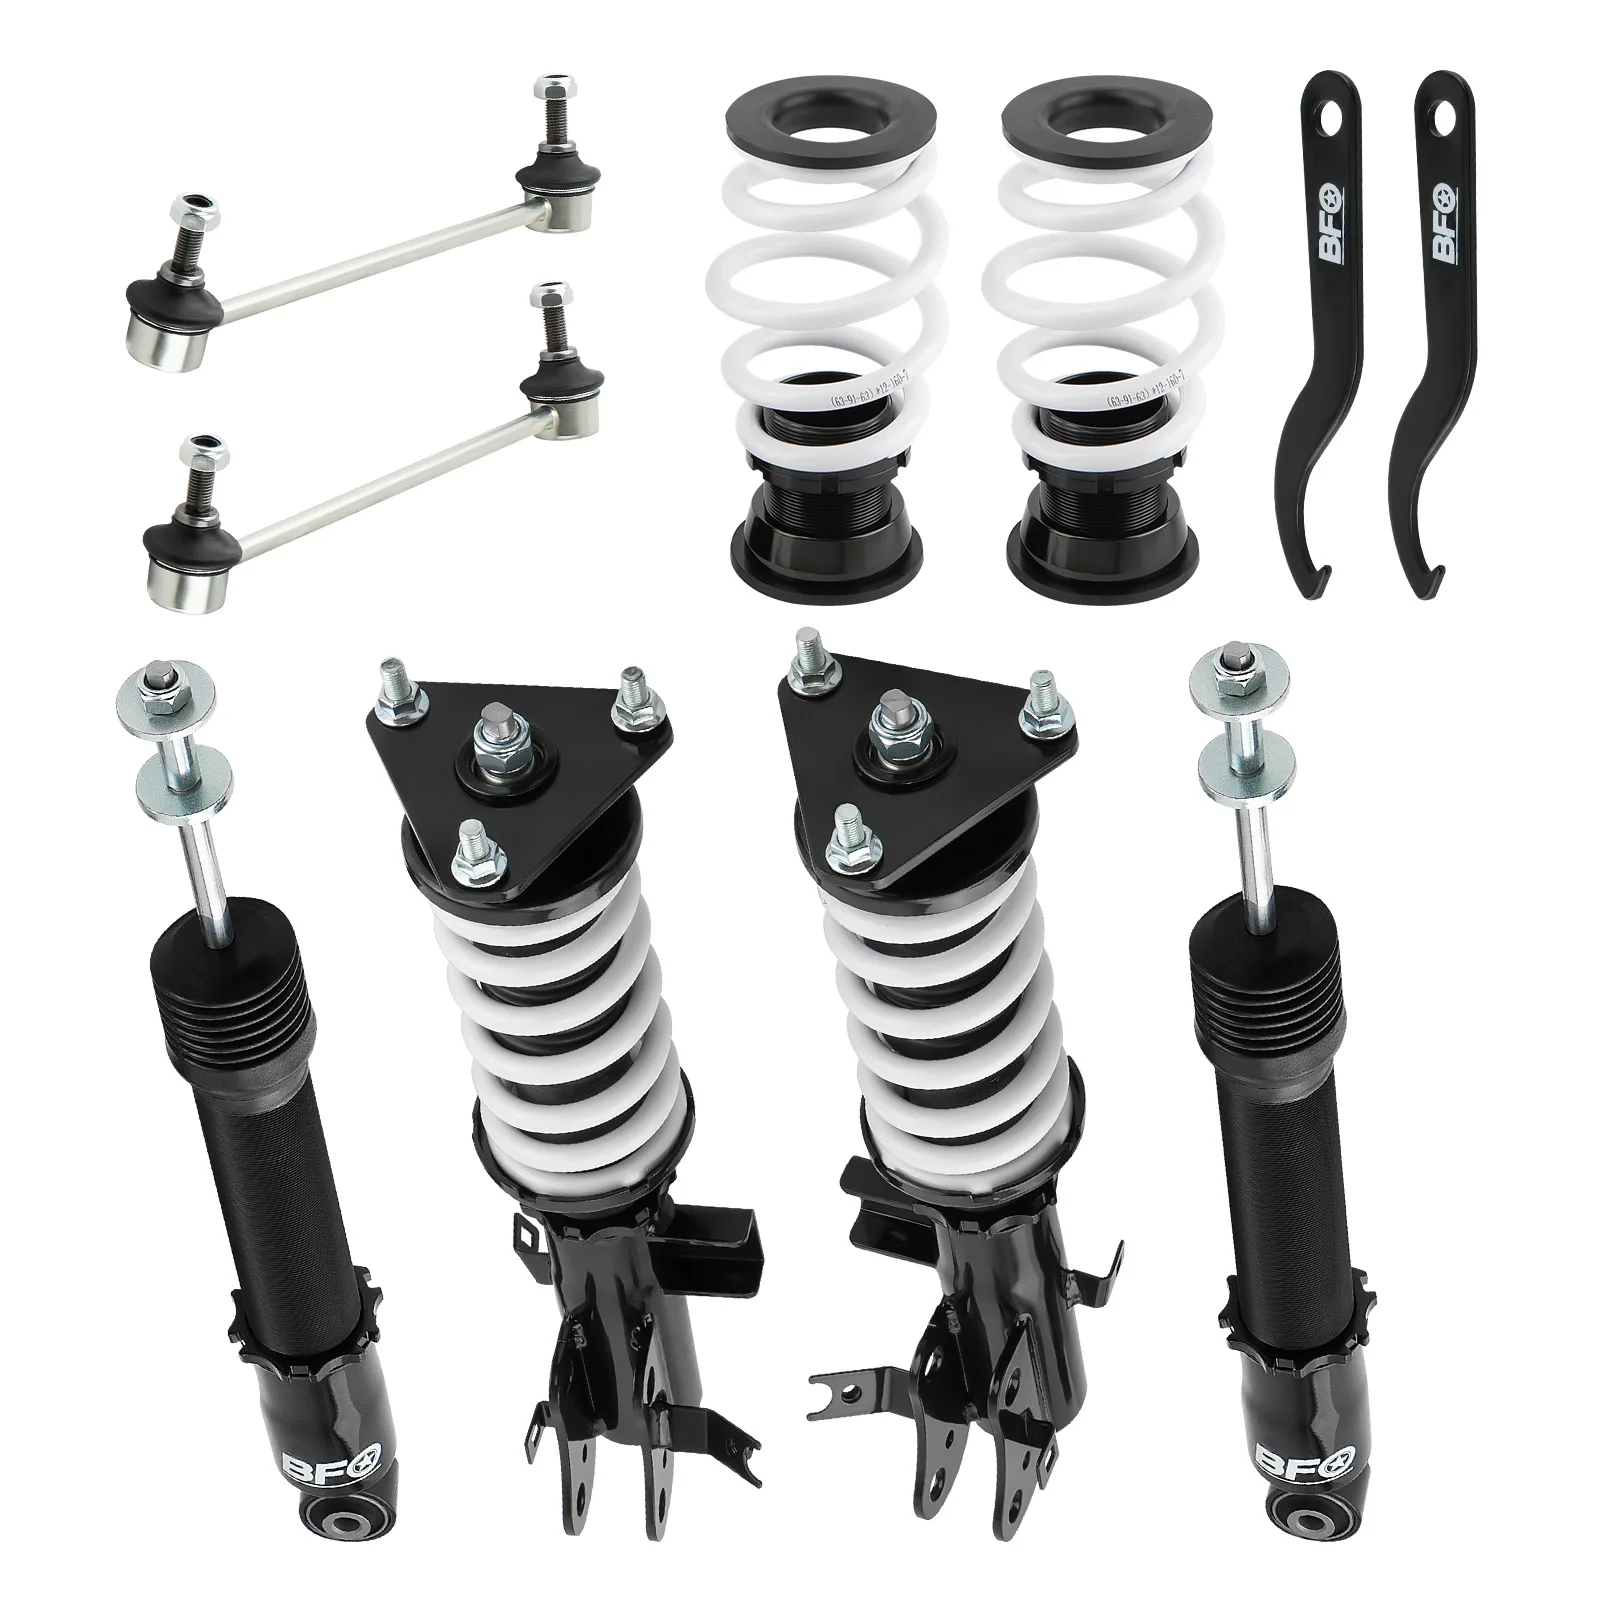 

BFO Coilovers Adjustable Suspension Lowering Kit For Honda Civic FG FB 2012-2015 Coilovers Shock Absorbers Suspension Kits